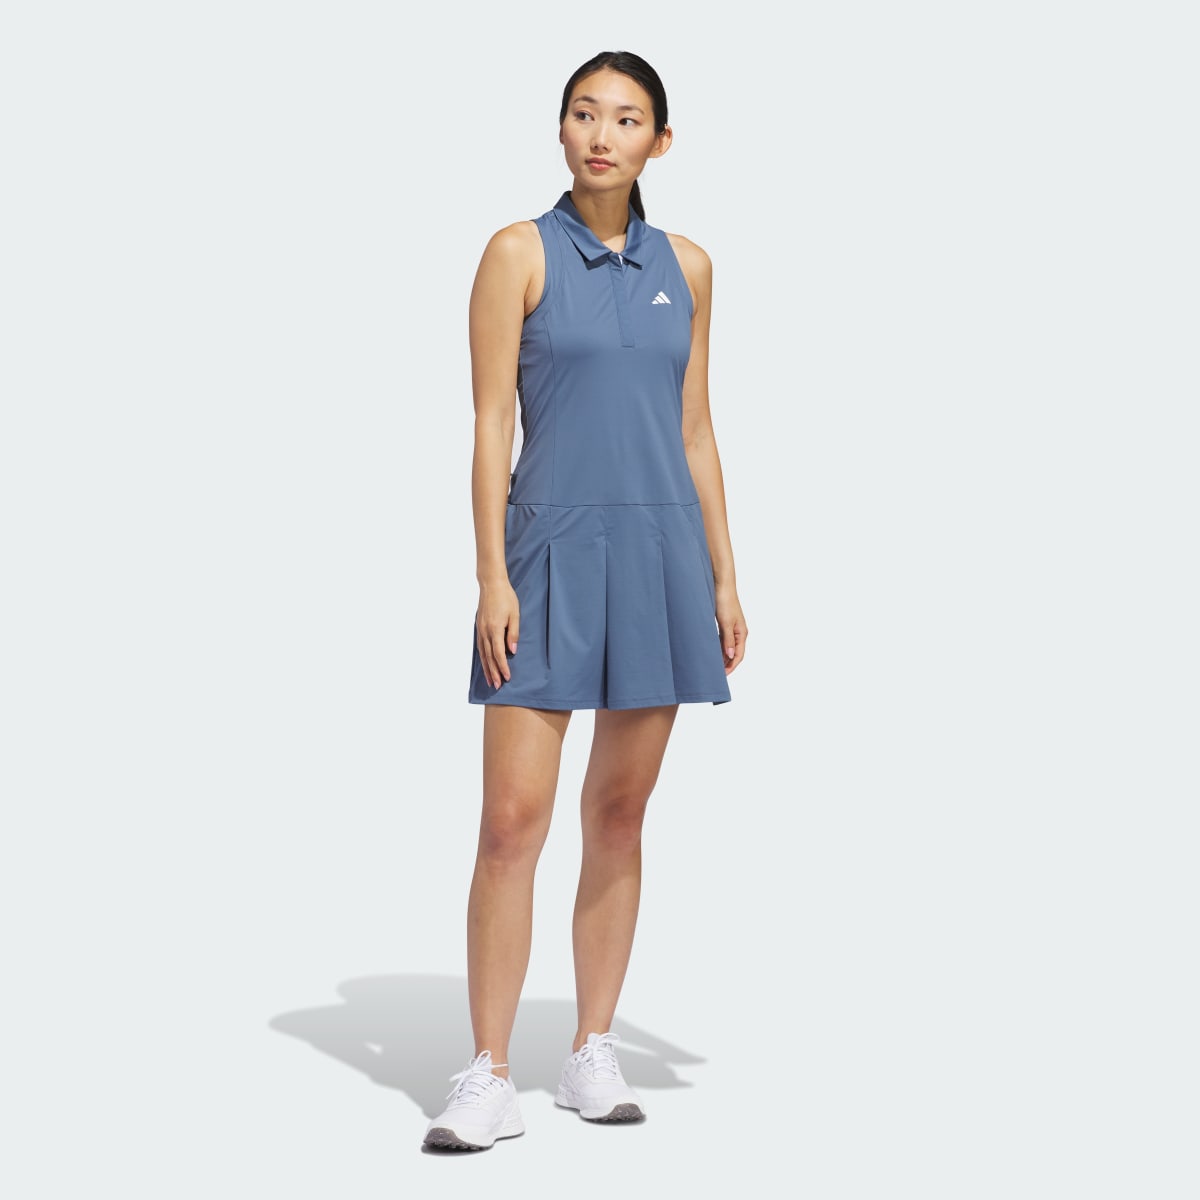 Adidas Women's Ultimate365 Tour Pleated Dress. 8